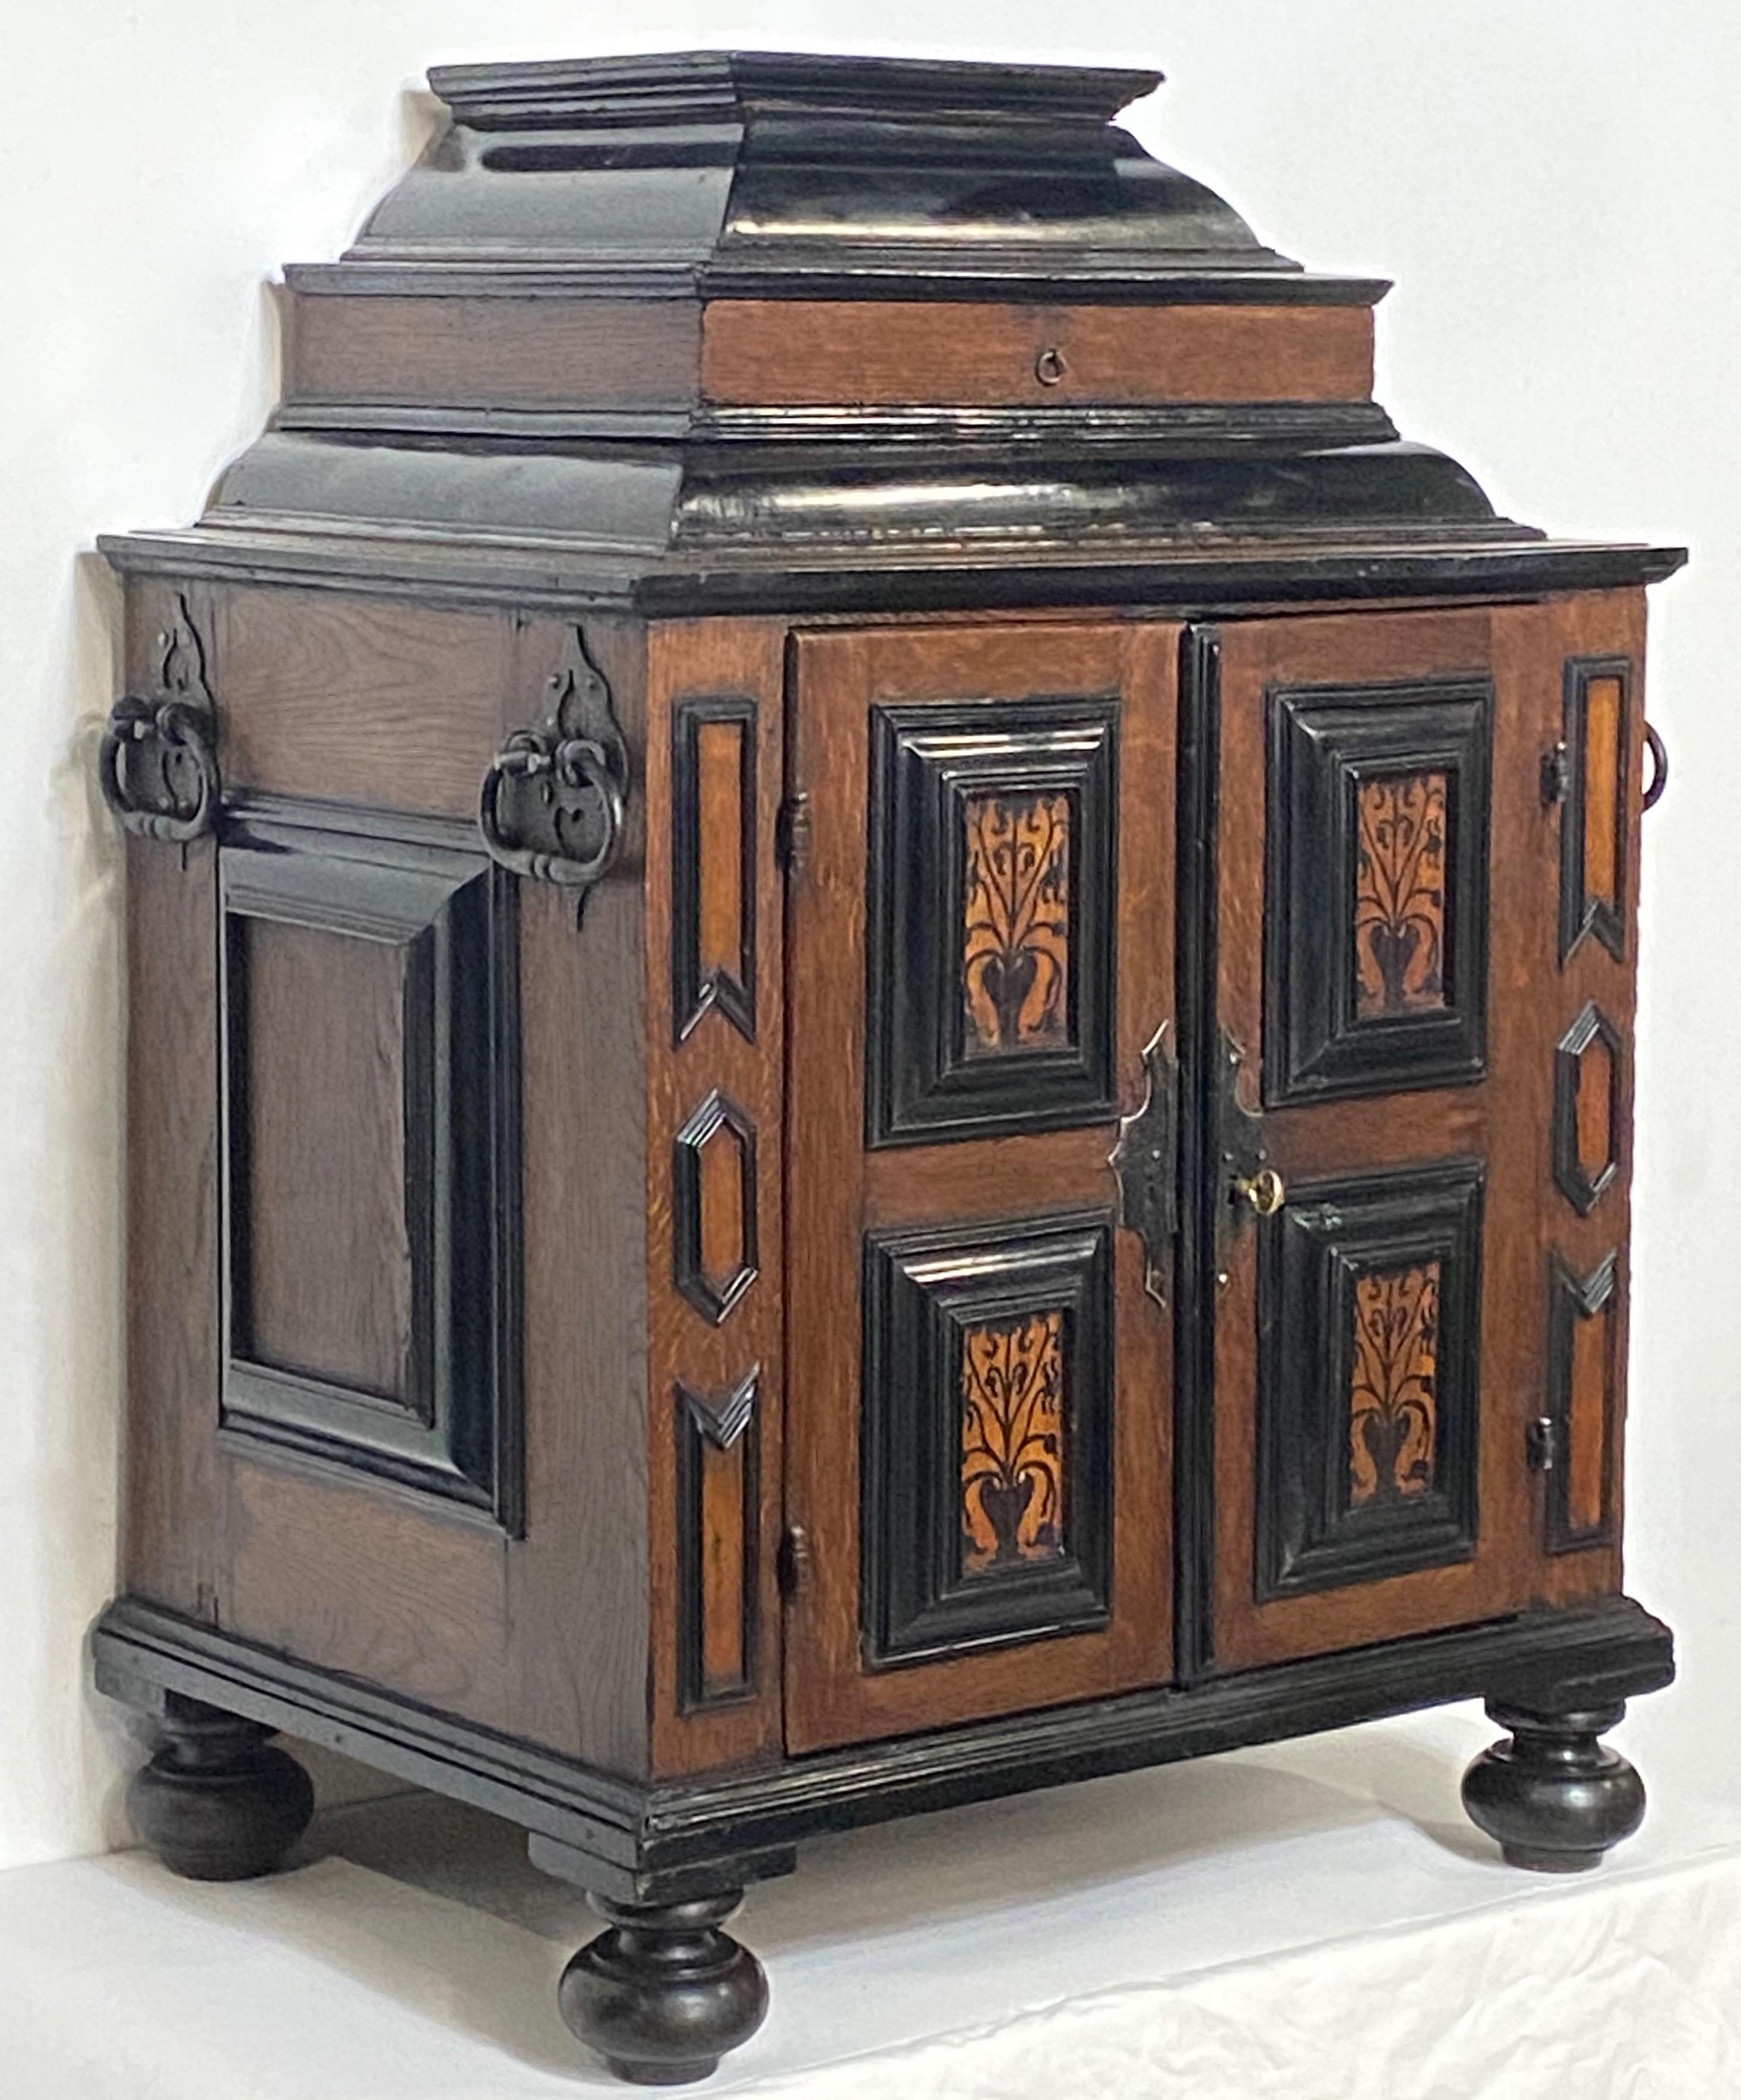 Large and unique jewelry or collectors cabinet.
Oak and Blackened Walnut with inlay marquetry detail, having original iron hardware and original lock (no key). Fitted multi drawer interior, and the top of the cabinet opening to reveal a red fabric